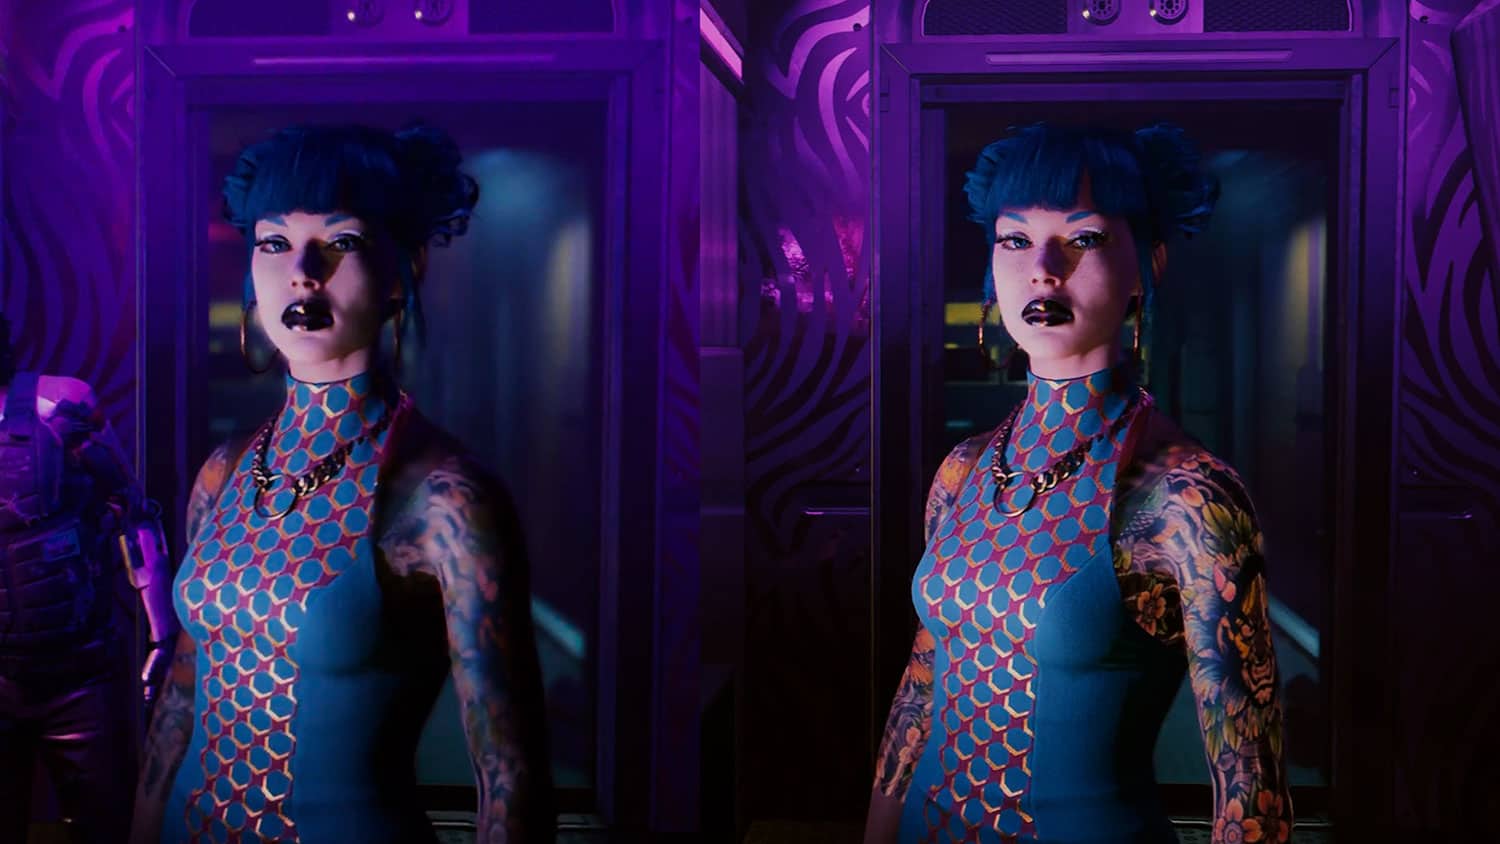 Still comparing Cyberpunk 2077 footage from the 2020 PS5 release to the 2022 next gen upgrade. It shows a woman with blue hair and a patterned dress standing at a counter and the quality is much better in the second picture.